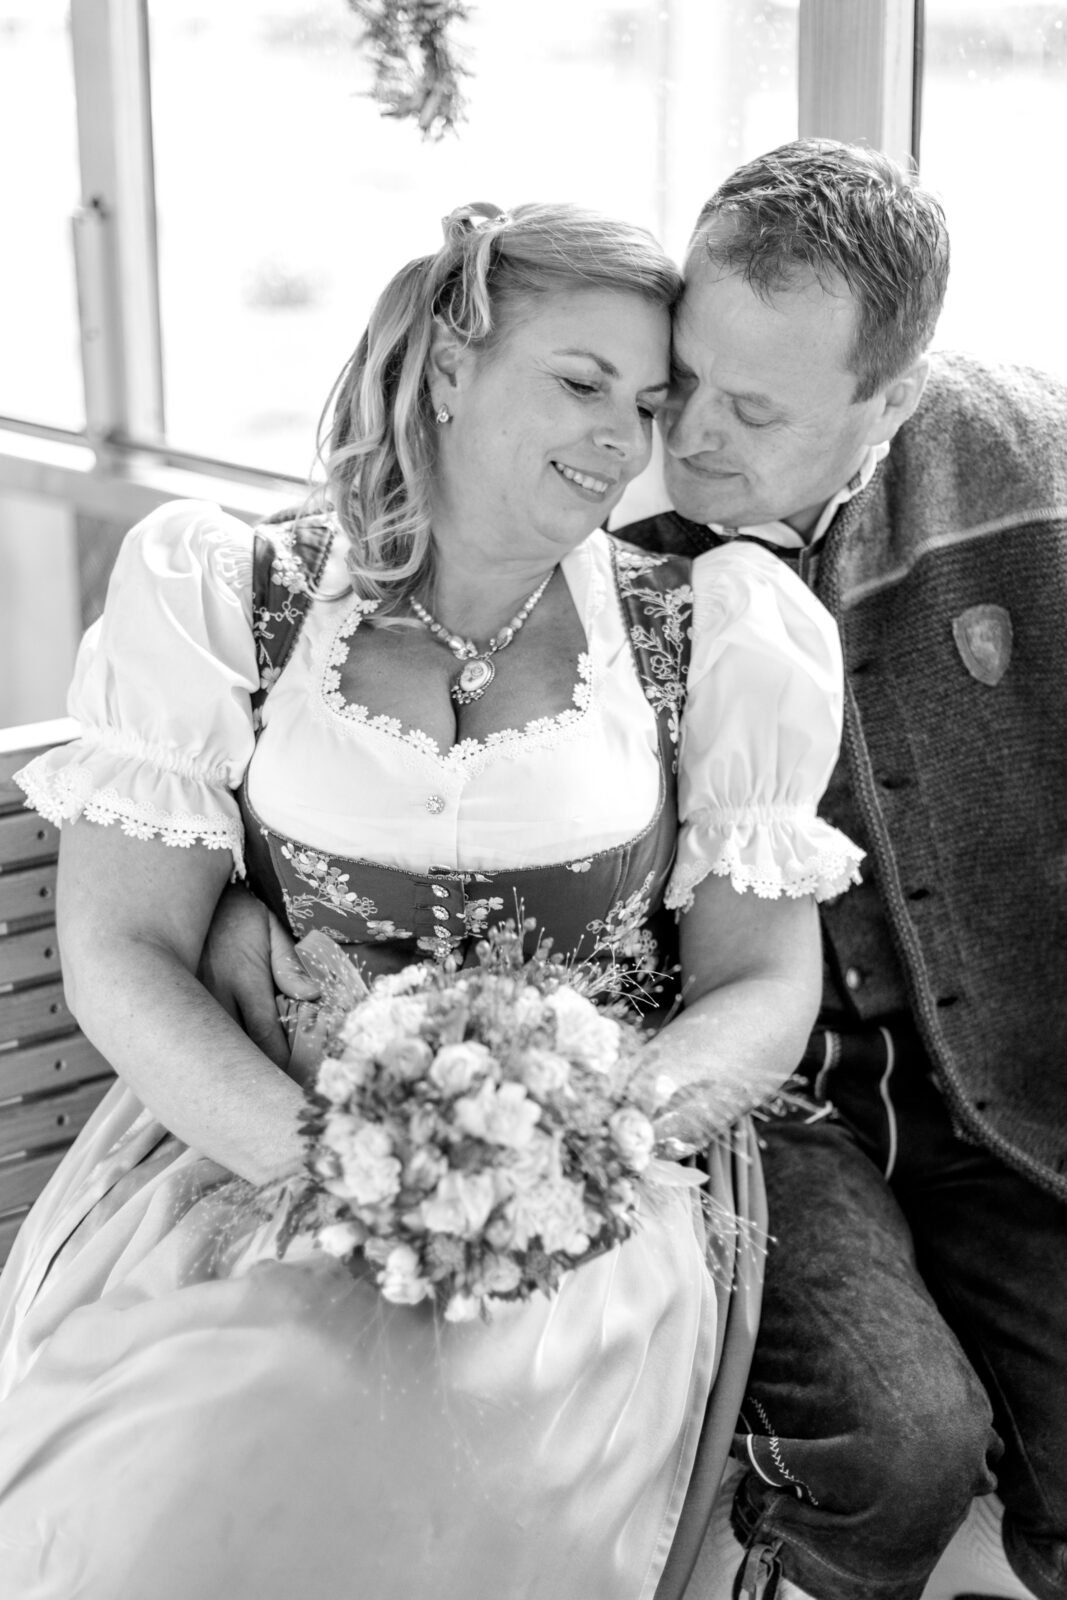 get married on the train in the bregenzerwald